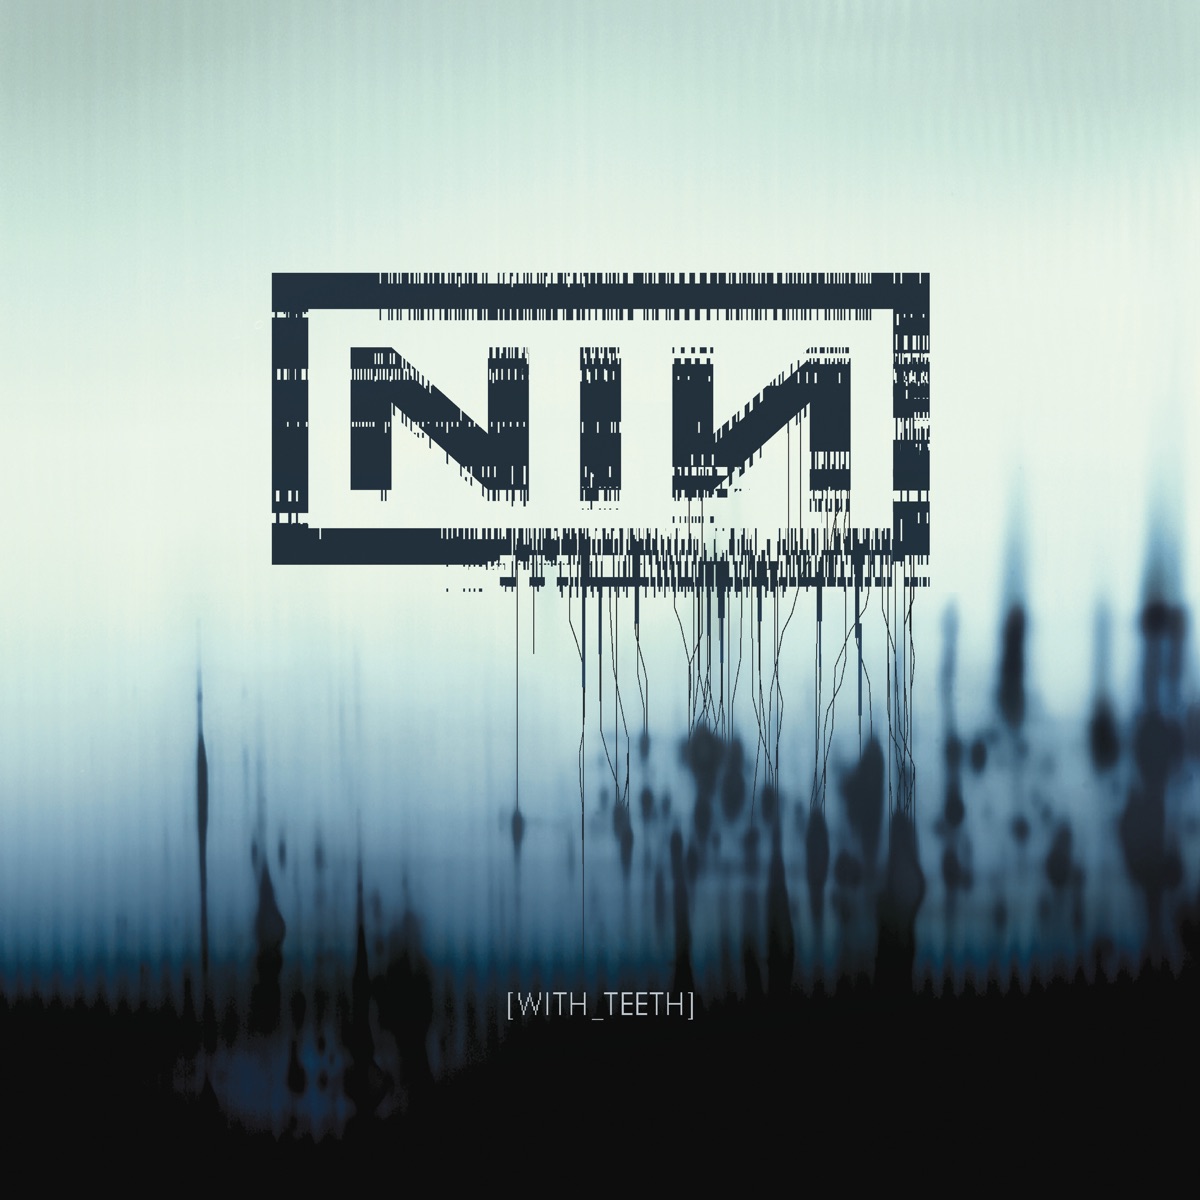 With Teeth - Album by Nine Inch Nails - Apple Music